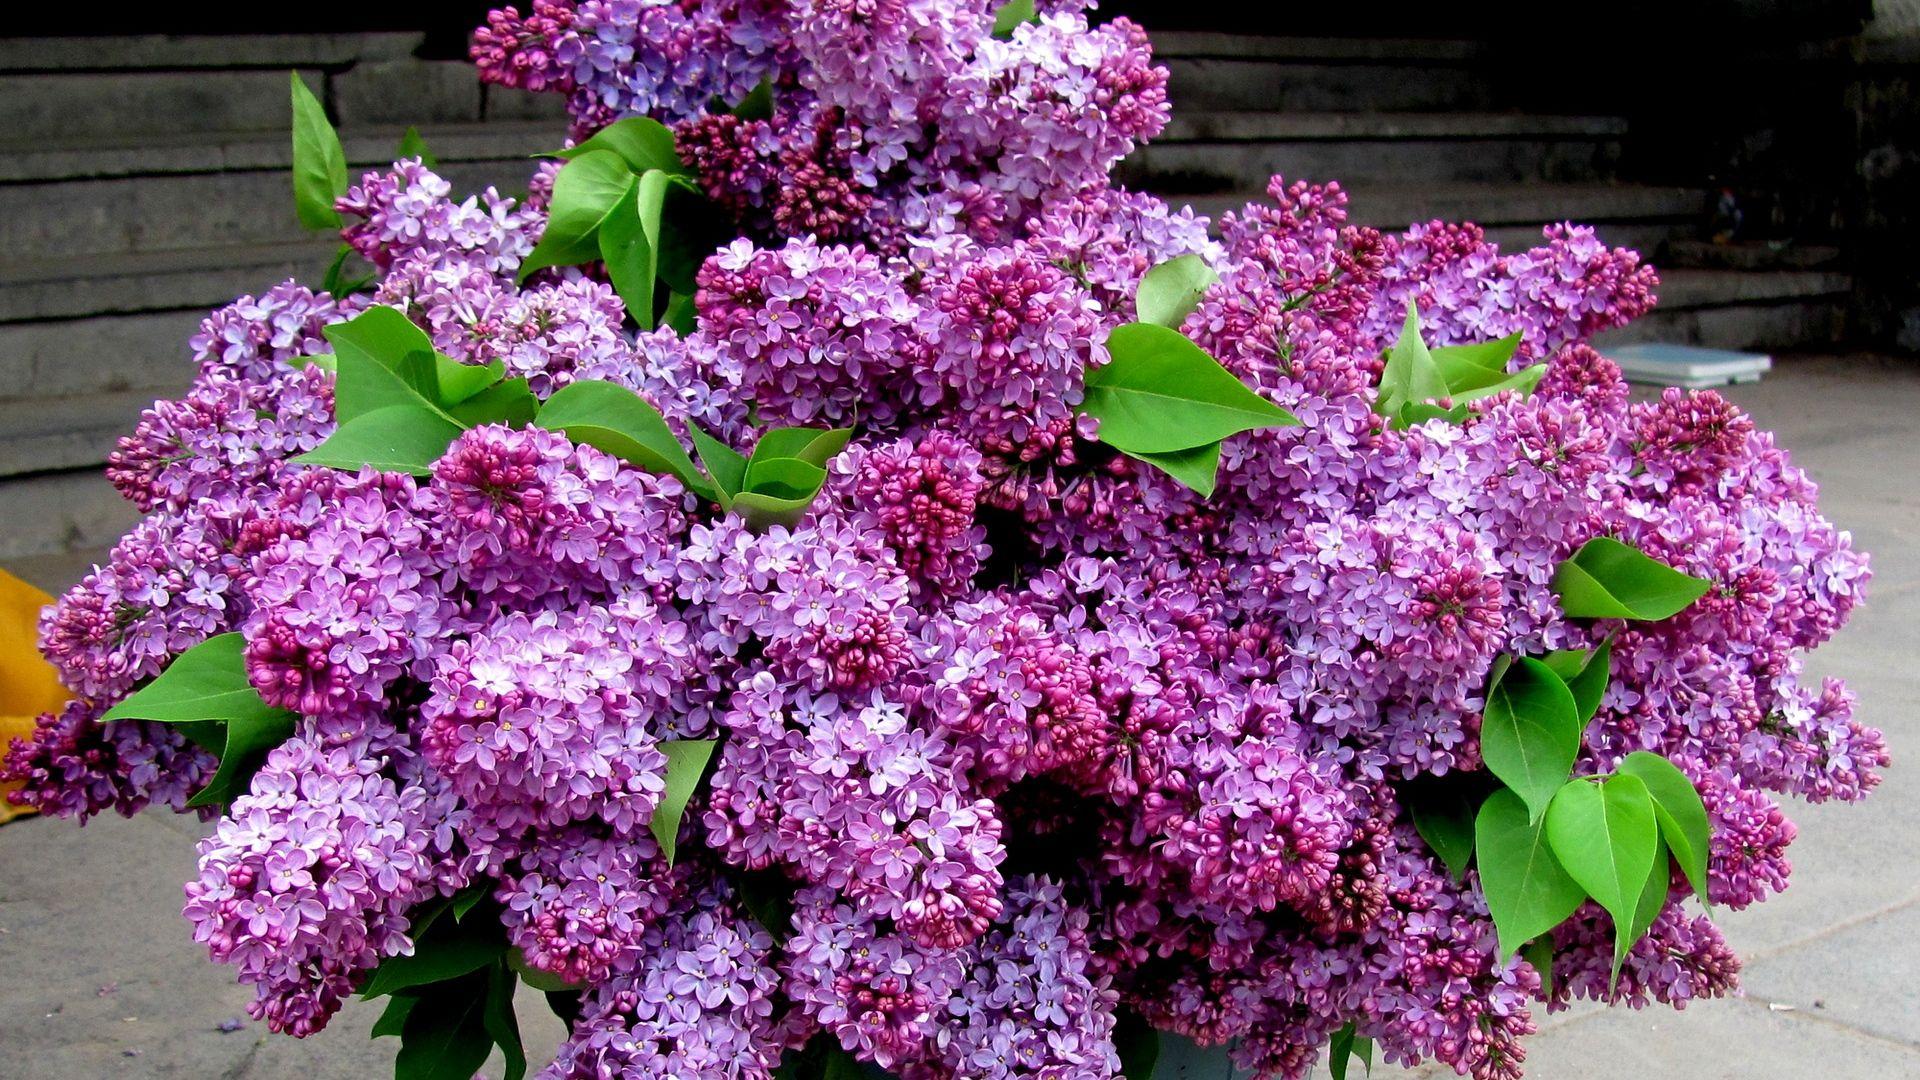 Download Wallpaper 1920x1080 lilacs, bouquet, bucket, leaves, spring